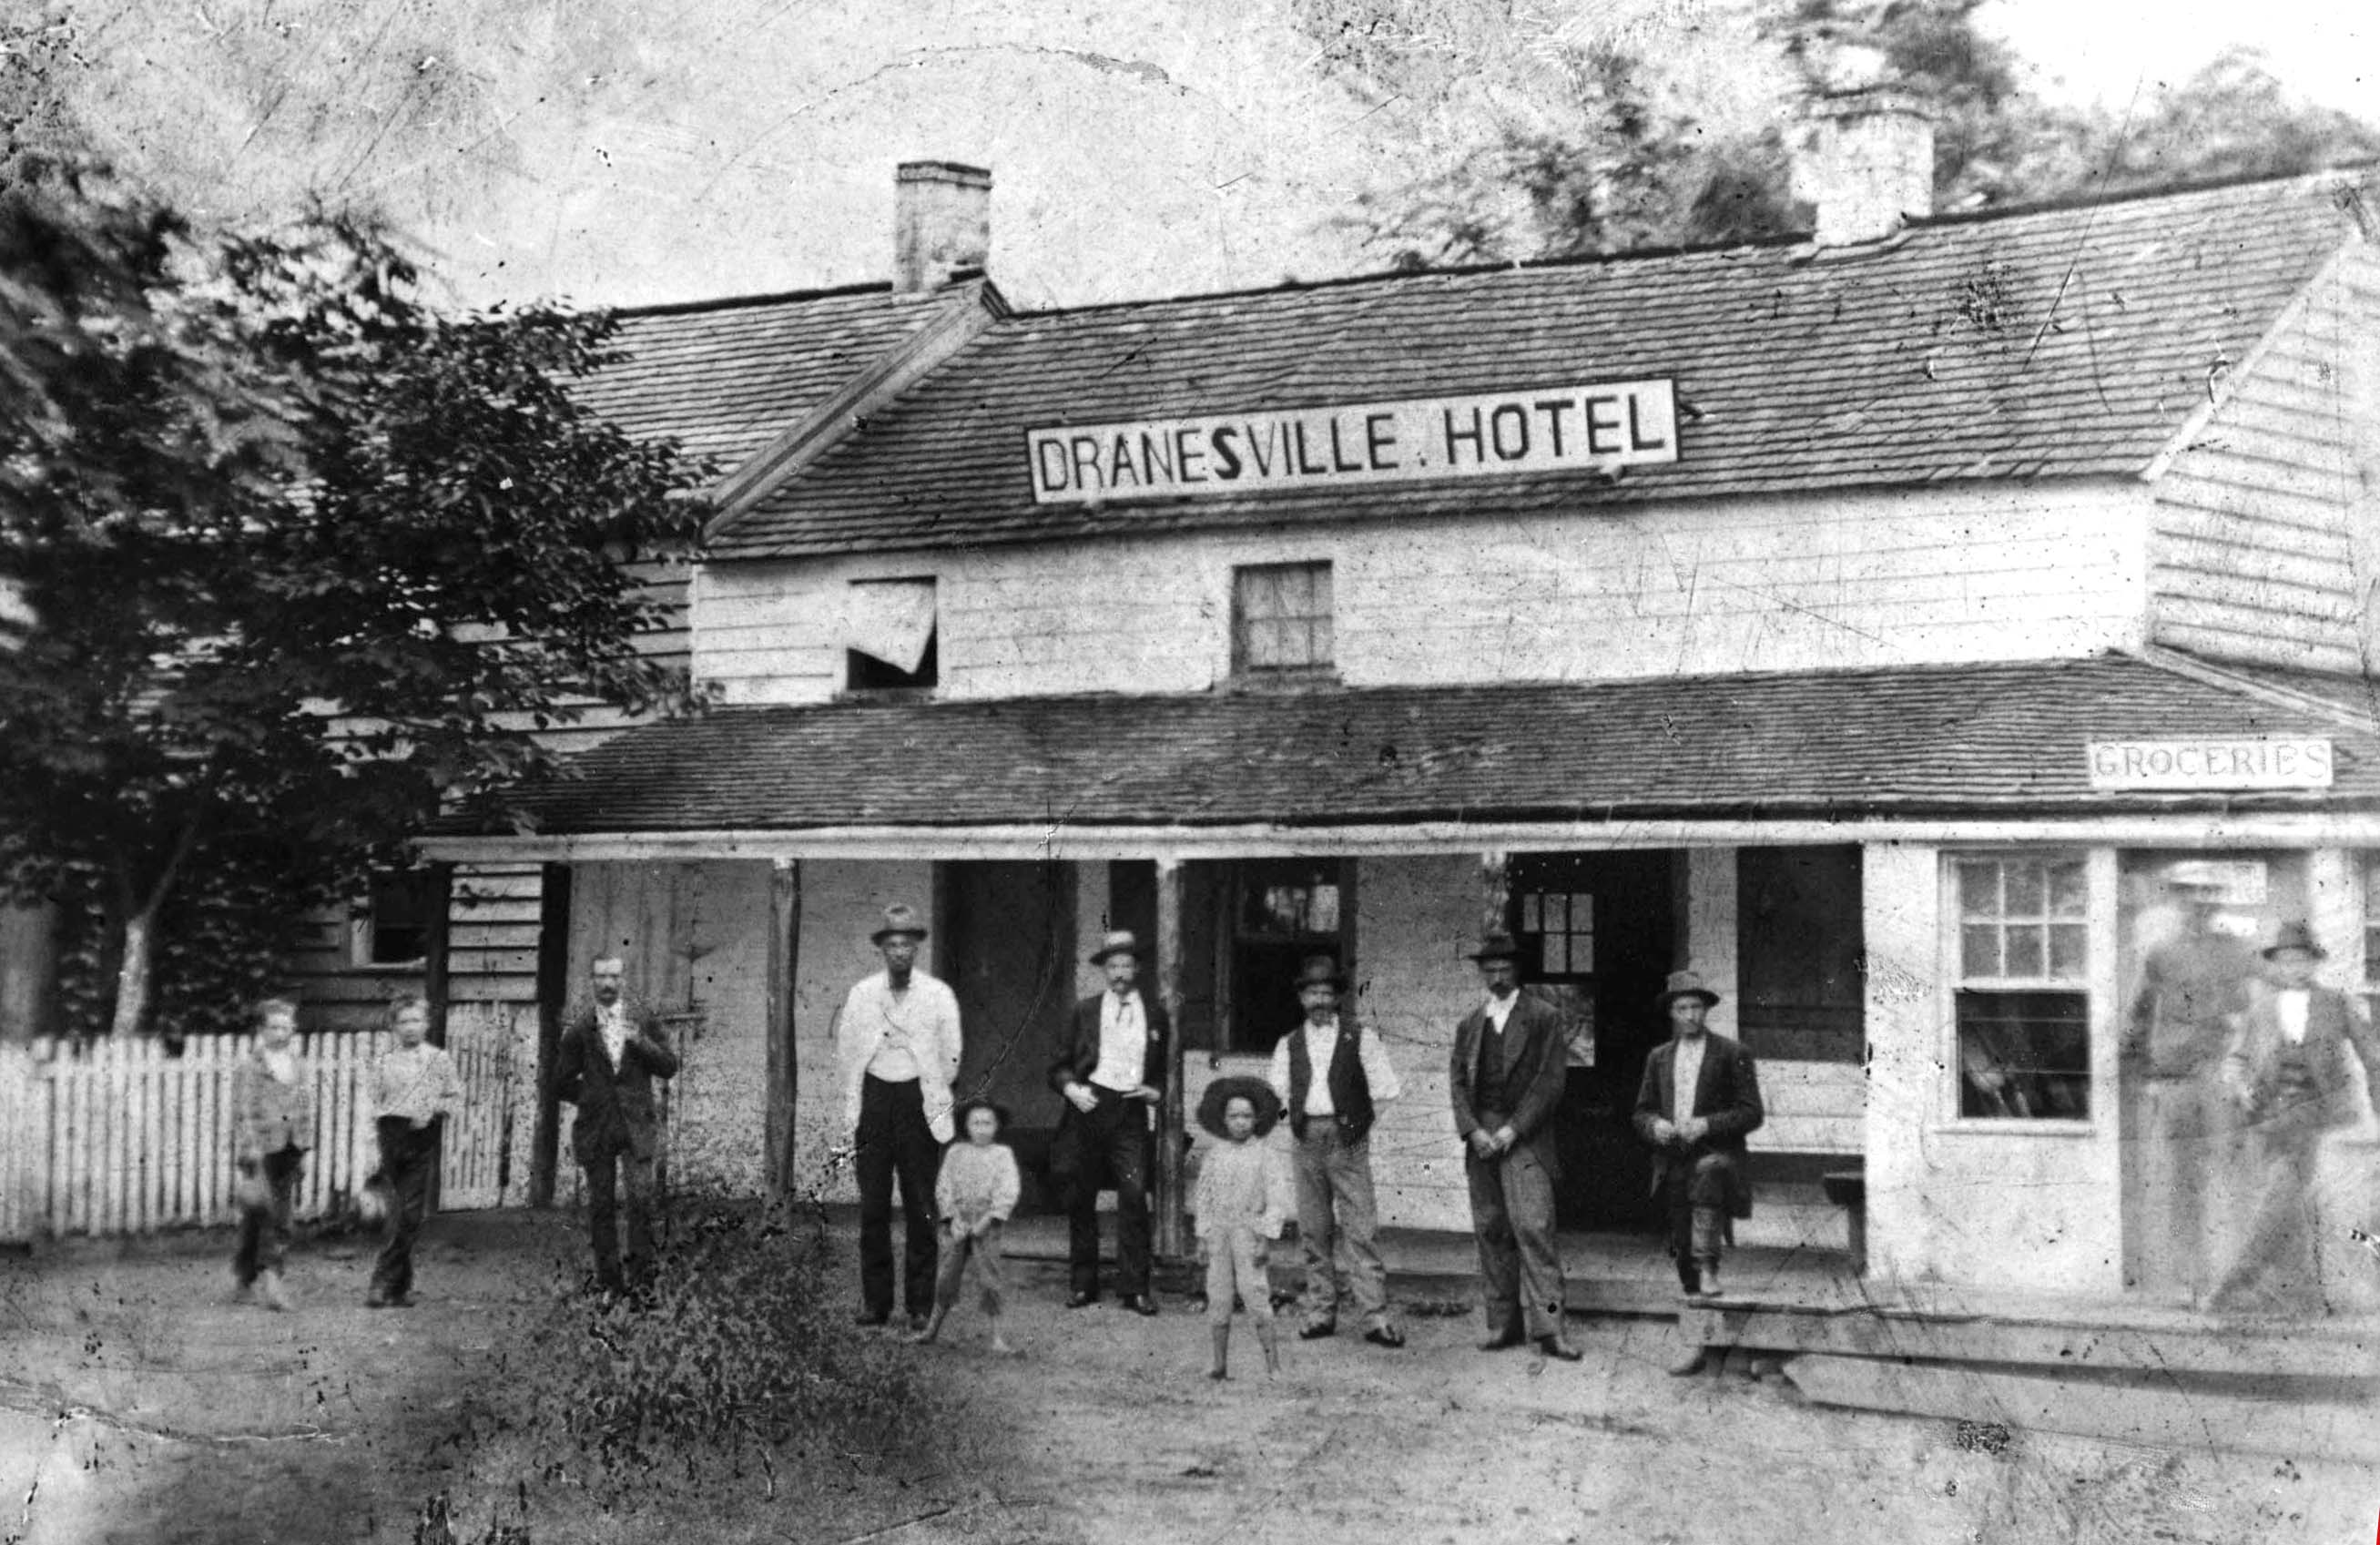 19th century photograph of the Dranesville Hotel. Adults and children stand in front of the building.